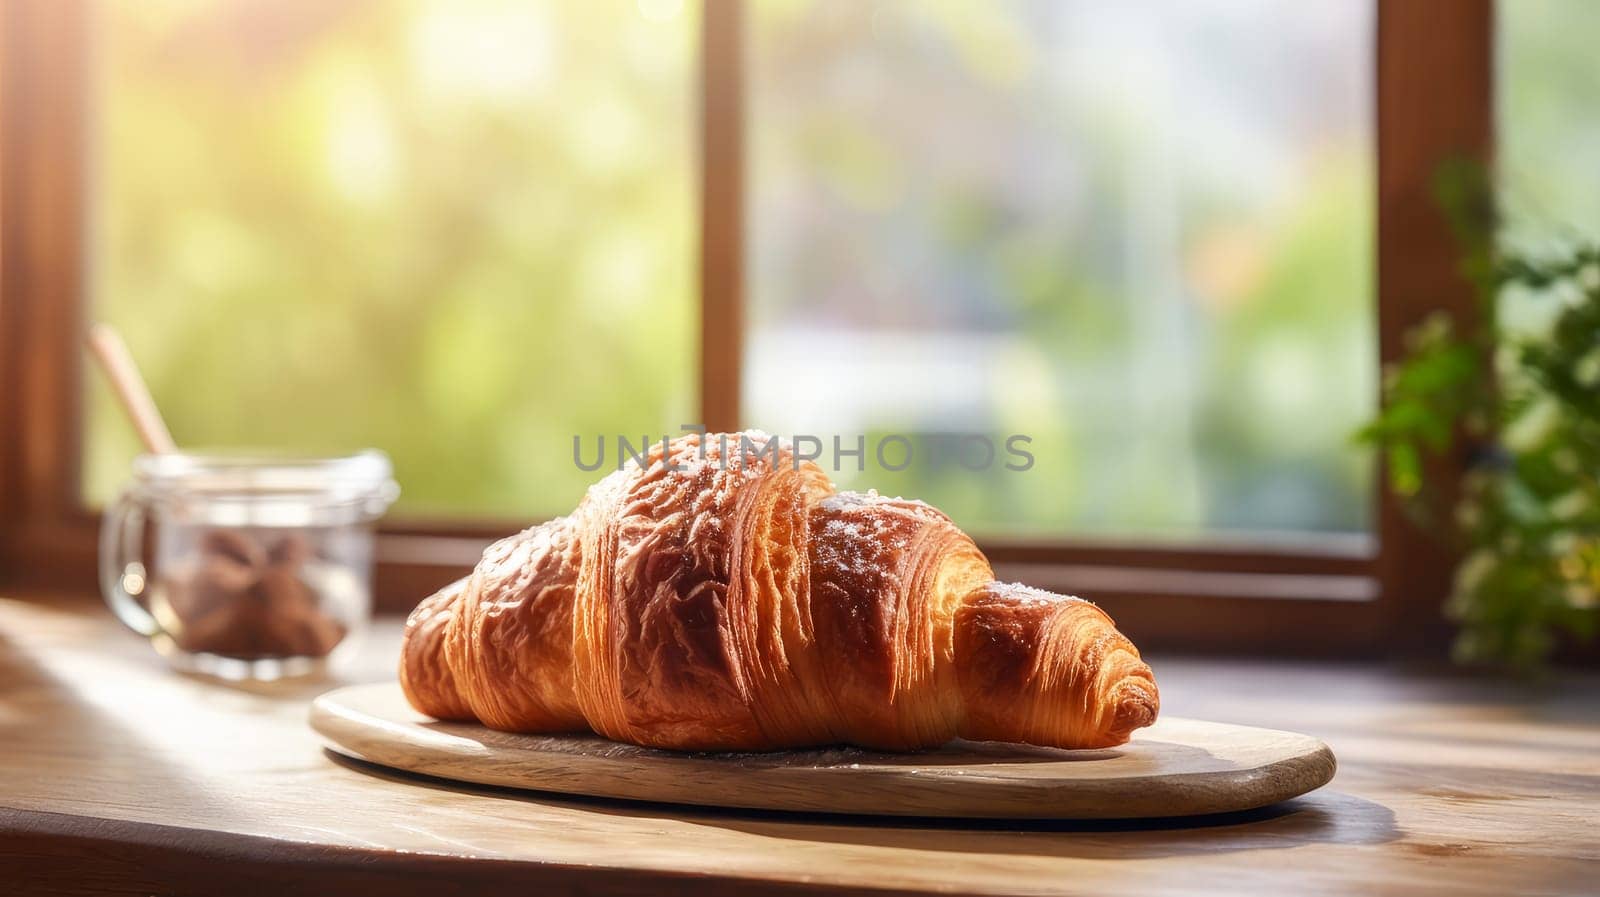 Breakfast fresh golden French croissant on the table, on a wooden surface near the window. Fresh classic pastries. Delicious food concept, private bakery, small business, self-employed, small business in the city, cozy place for communication